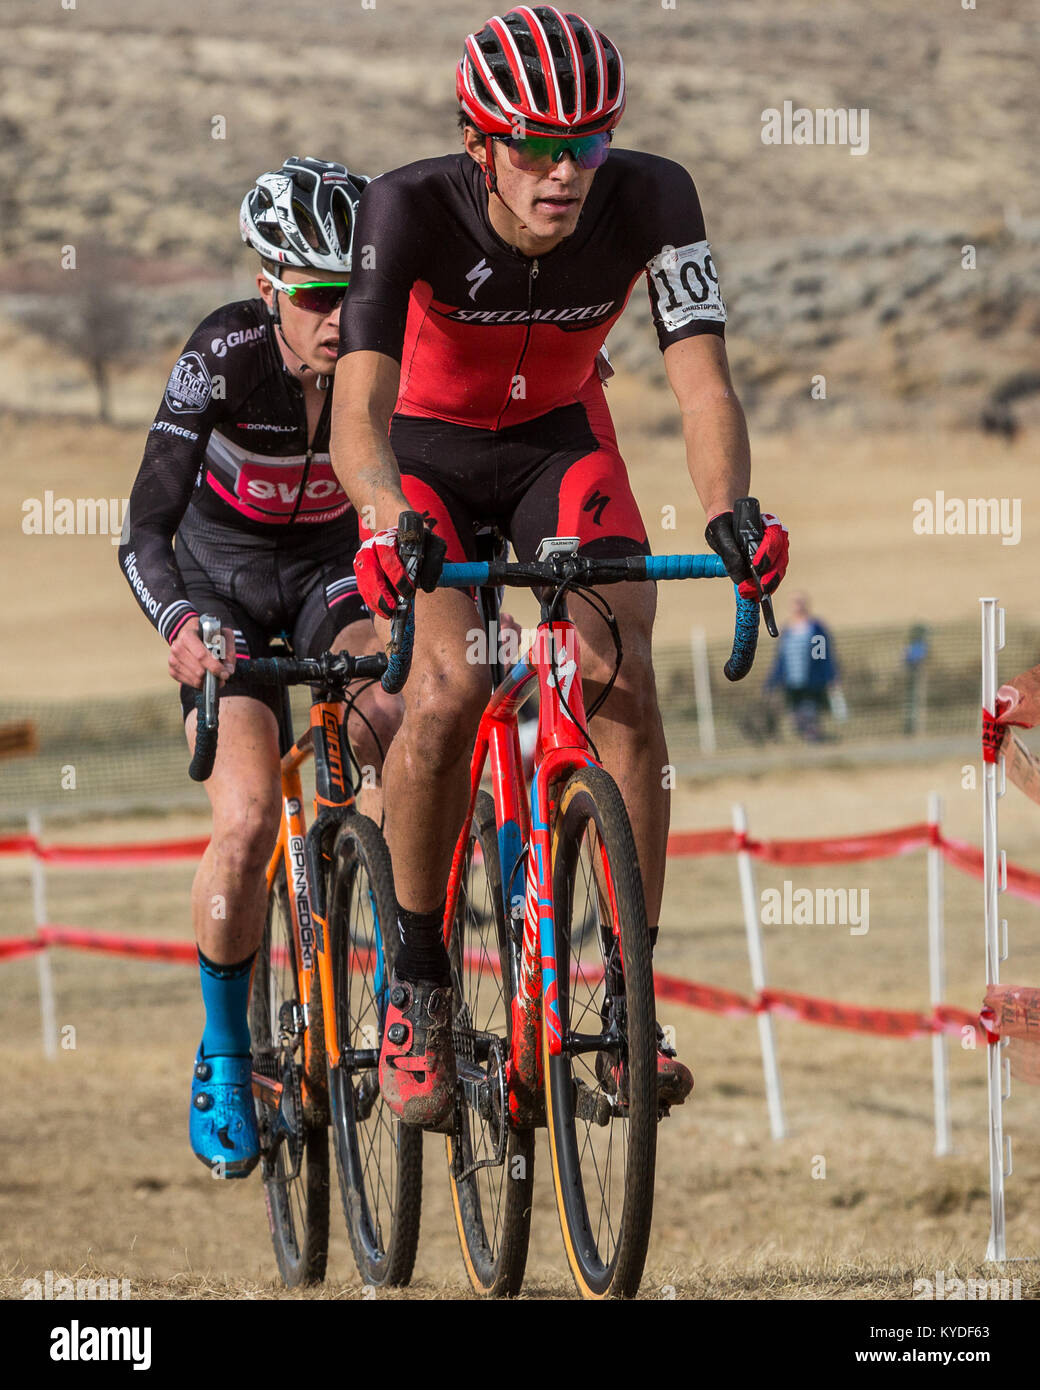 Reno, Nevada, USA. 14th Jan, 2018. CHRISTOPHER BLEVINS holds a tight lead over ERIC BRUNNER during the Men's U23 USA Cycling Cyclocross National Championships at Rancho San Rafael Park in Reno, Nevada, on Sunday, January 14, 2018. Blevins and Brunner exchanged leads throughout the race, with Blevins taking victory in 52:38, six seconds in front of Brunner. Credit: Tracy Barbutes/ZUMA Wire/Alamy Live News Stock Photo